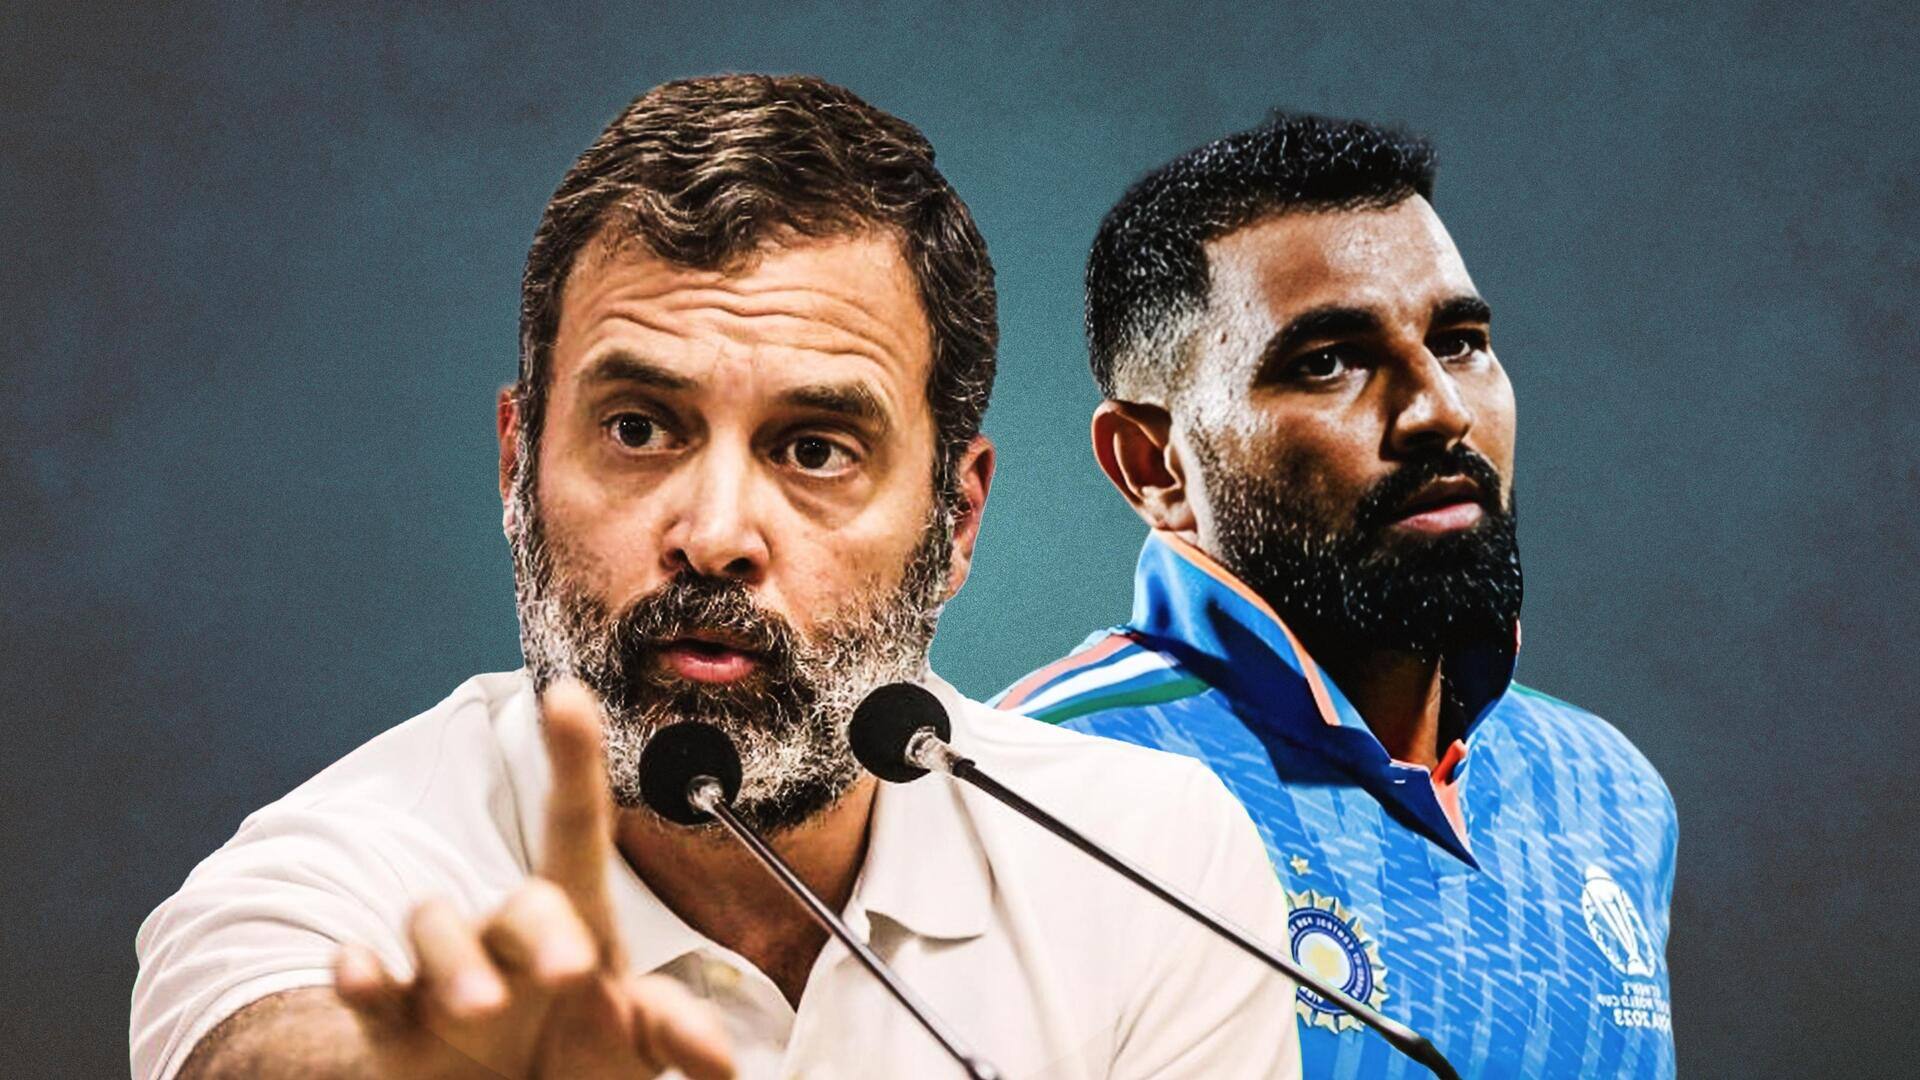 Only RaGa supported Shami: Congress after India's WC semifinal victory